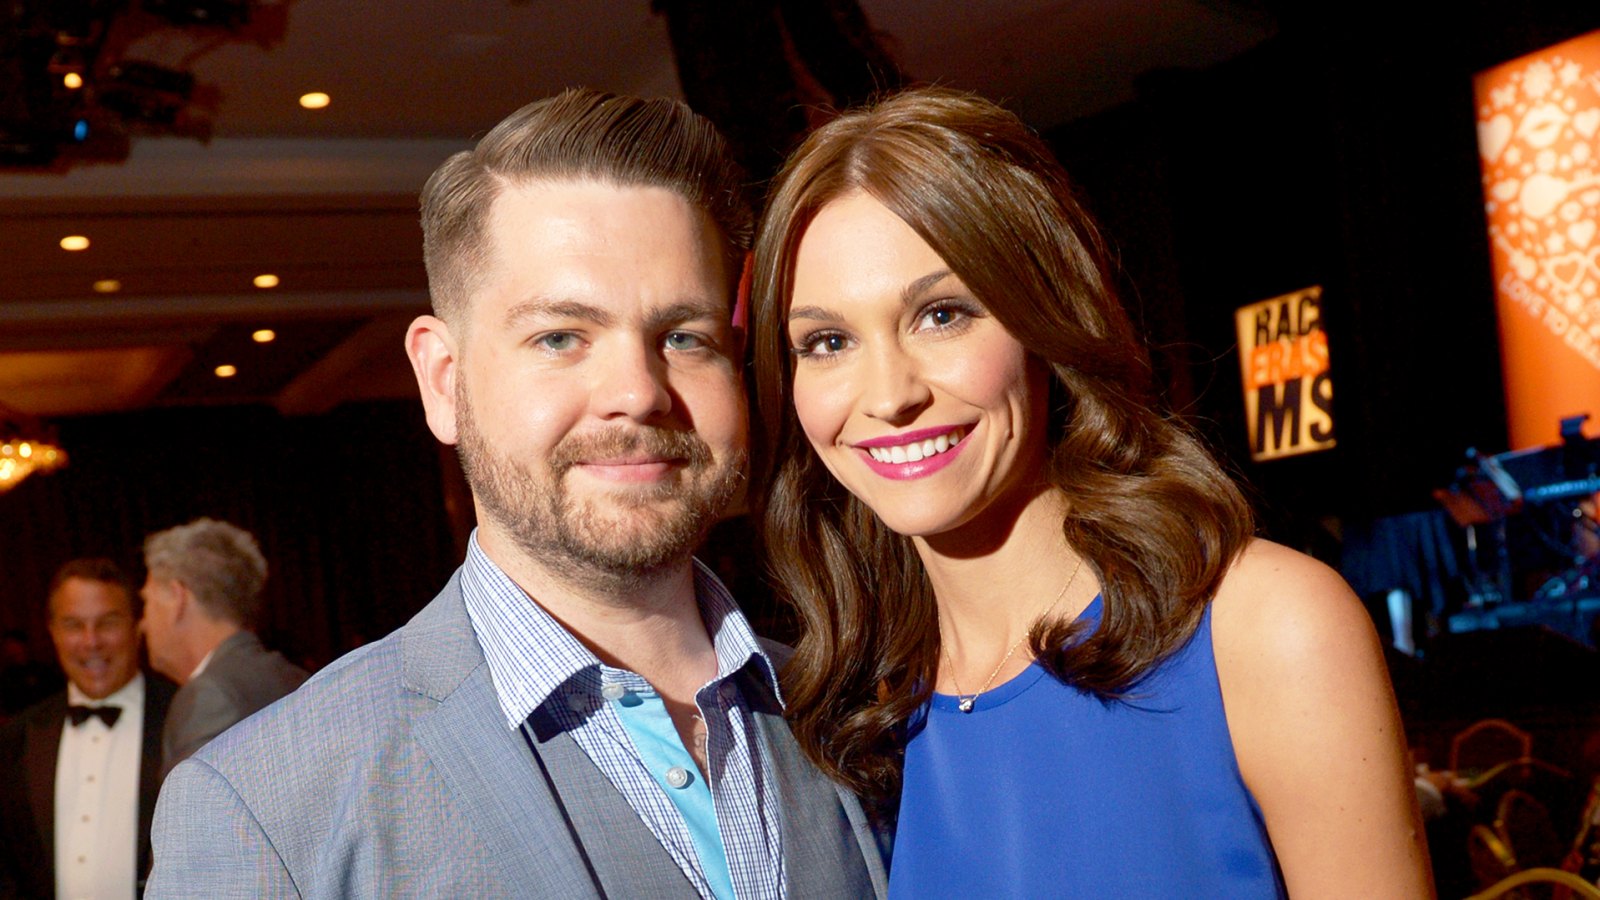 Jack Osbourne and Lisa attend the 21st annual Race to Erase MS at the Hyatt Regency Century Plaza in Century City, California.